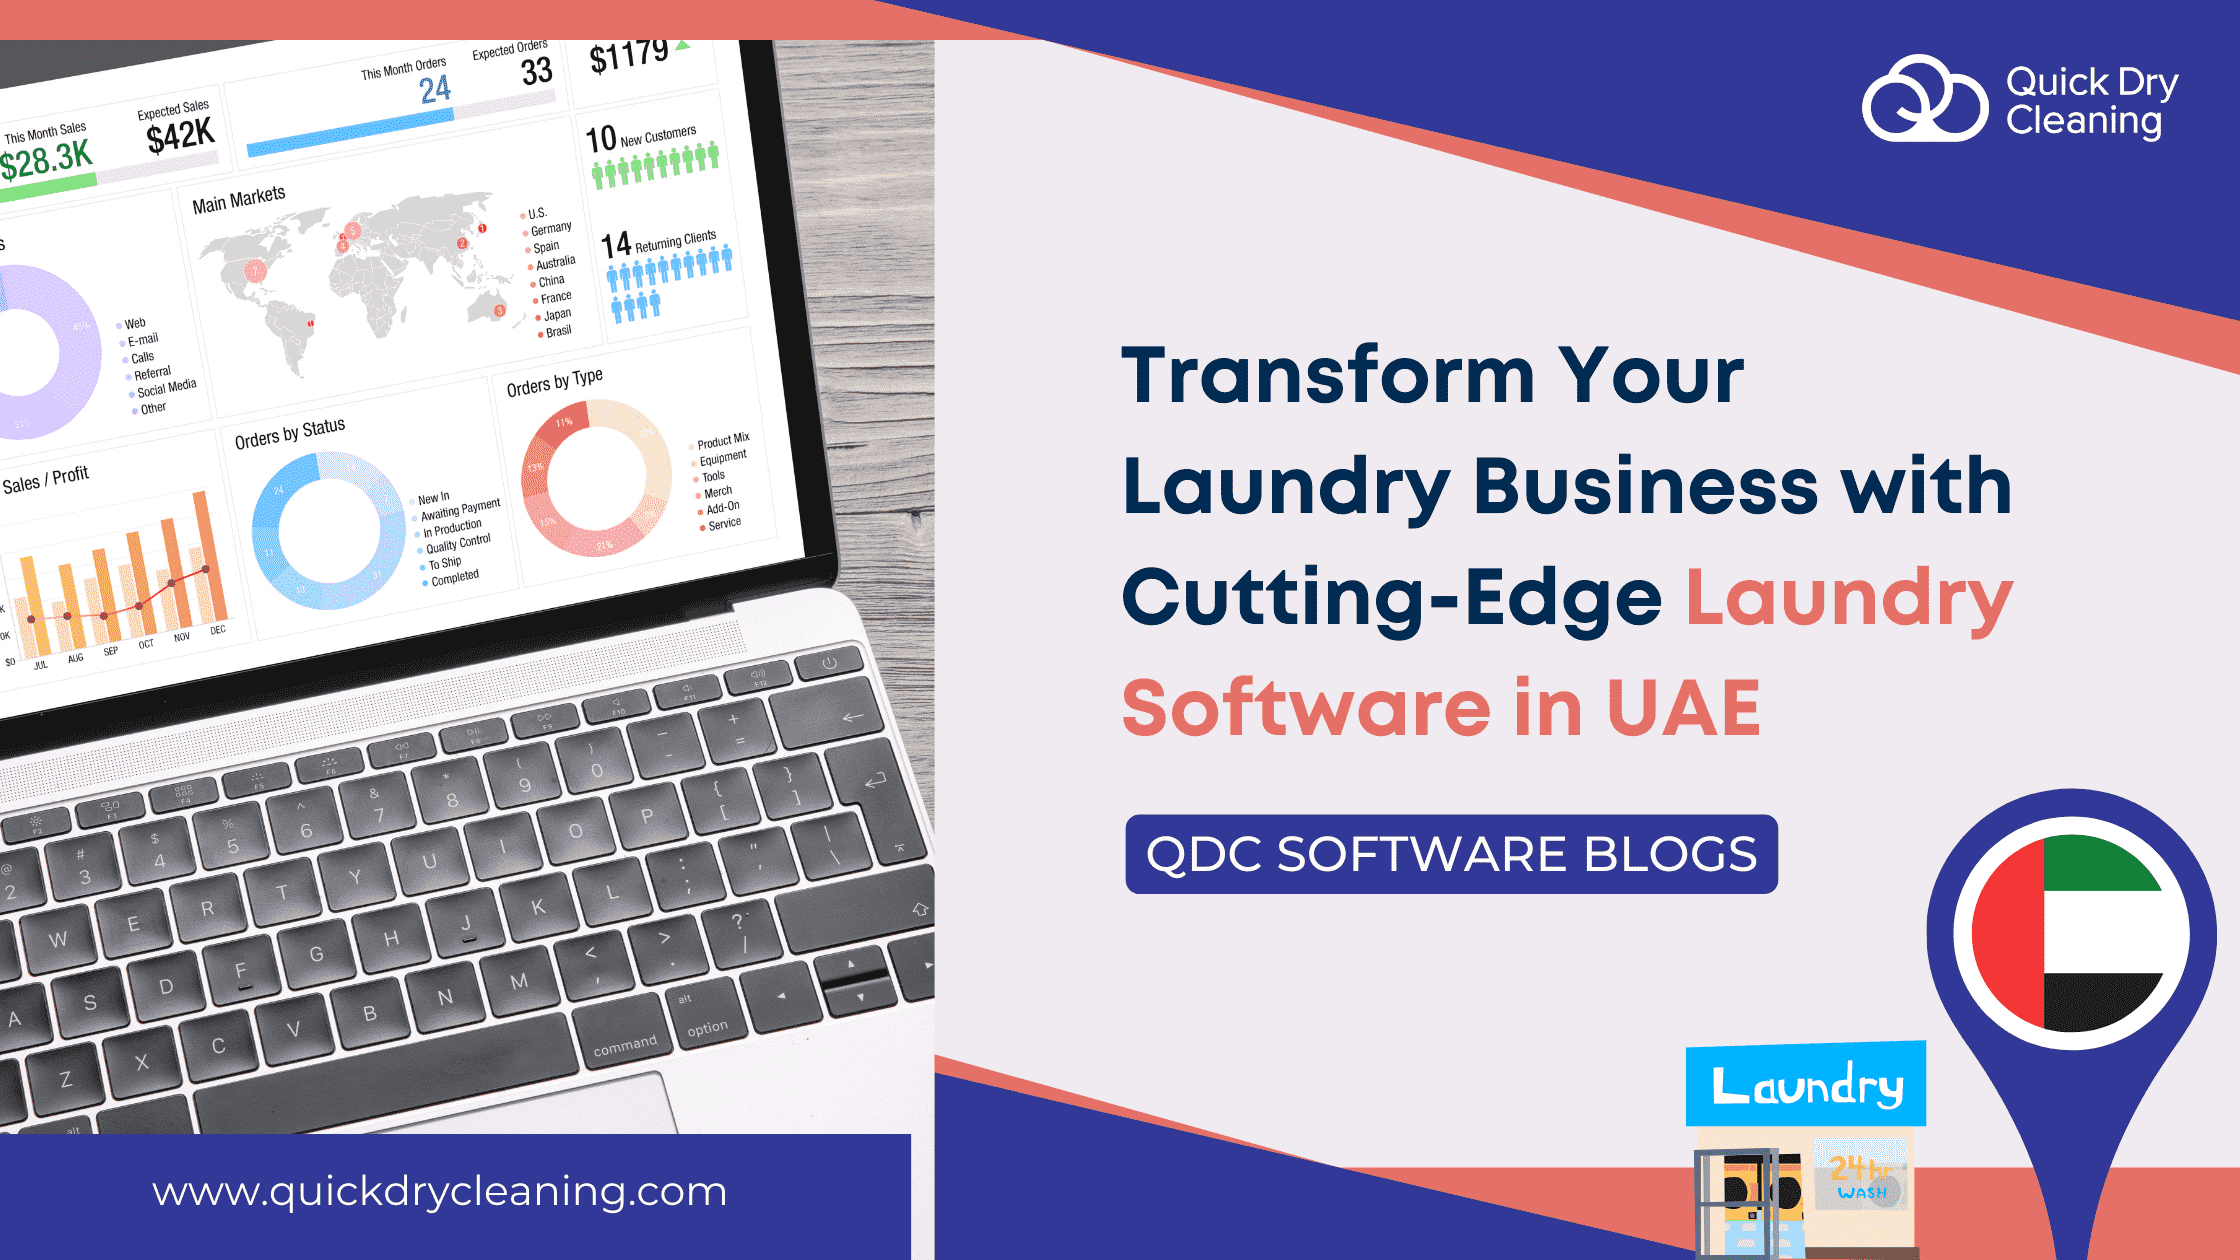 Laundry software in UAE